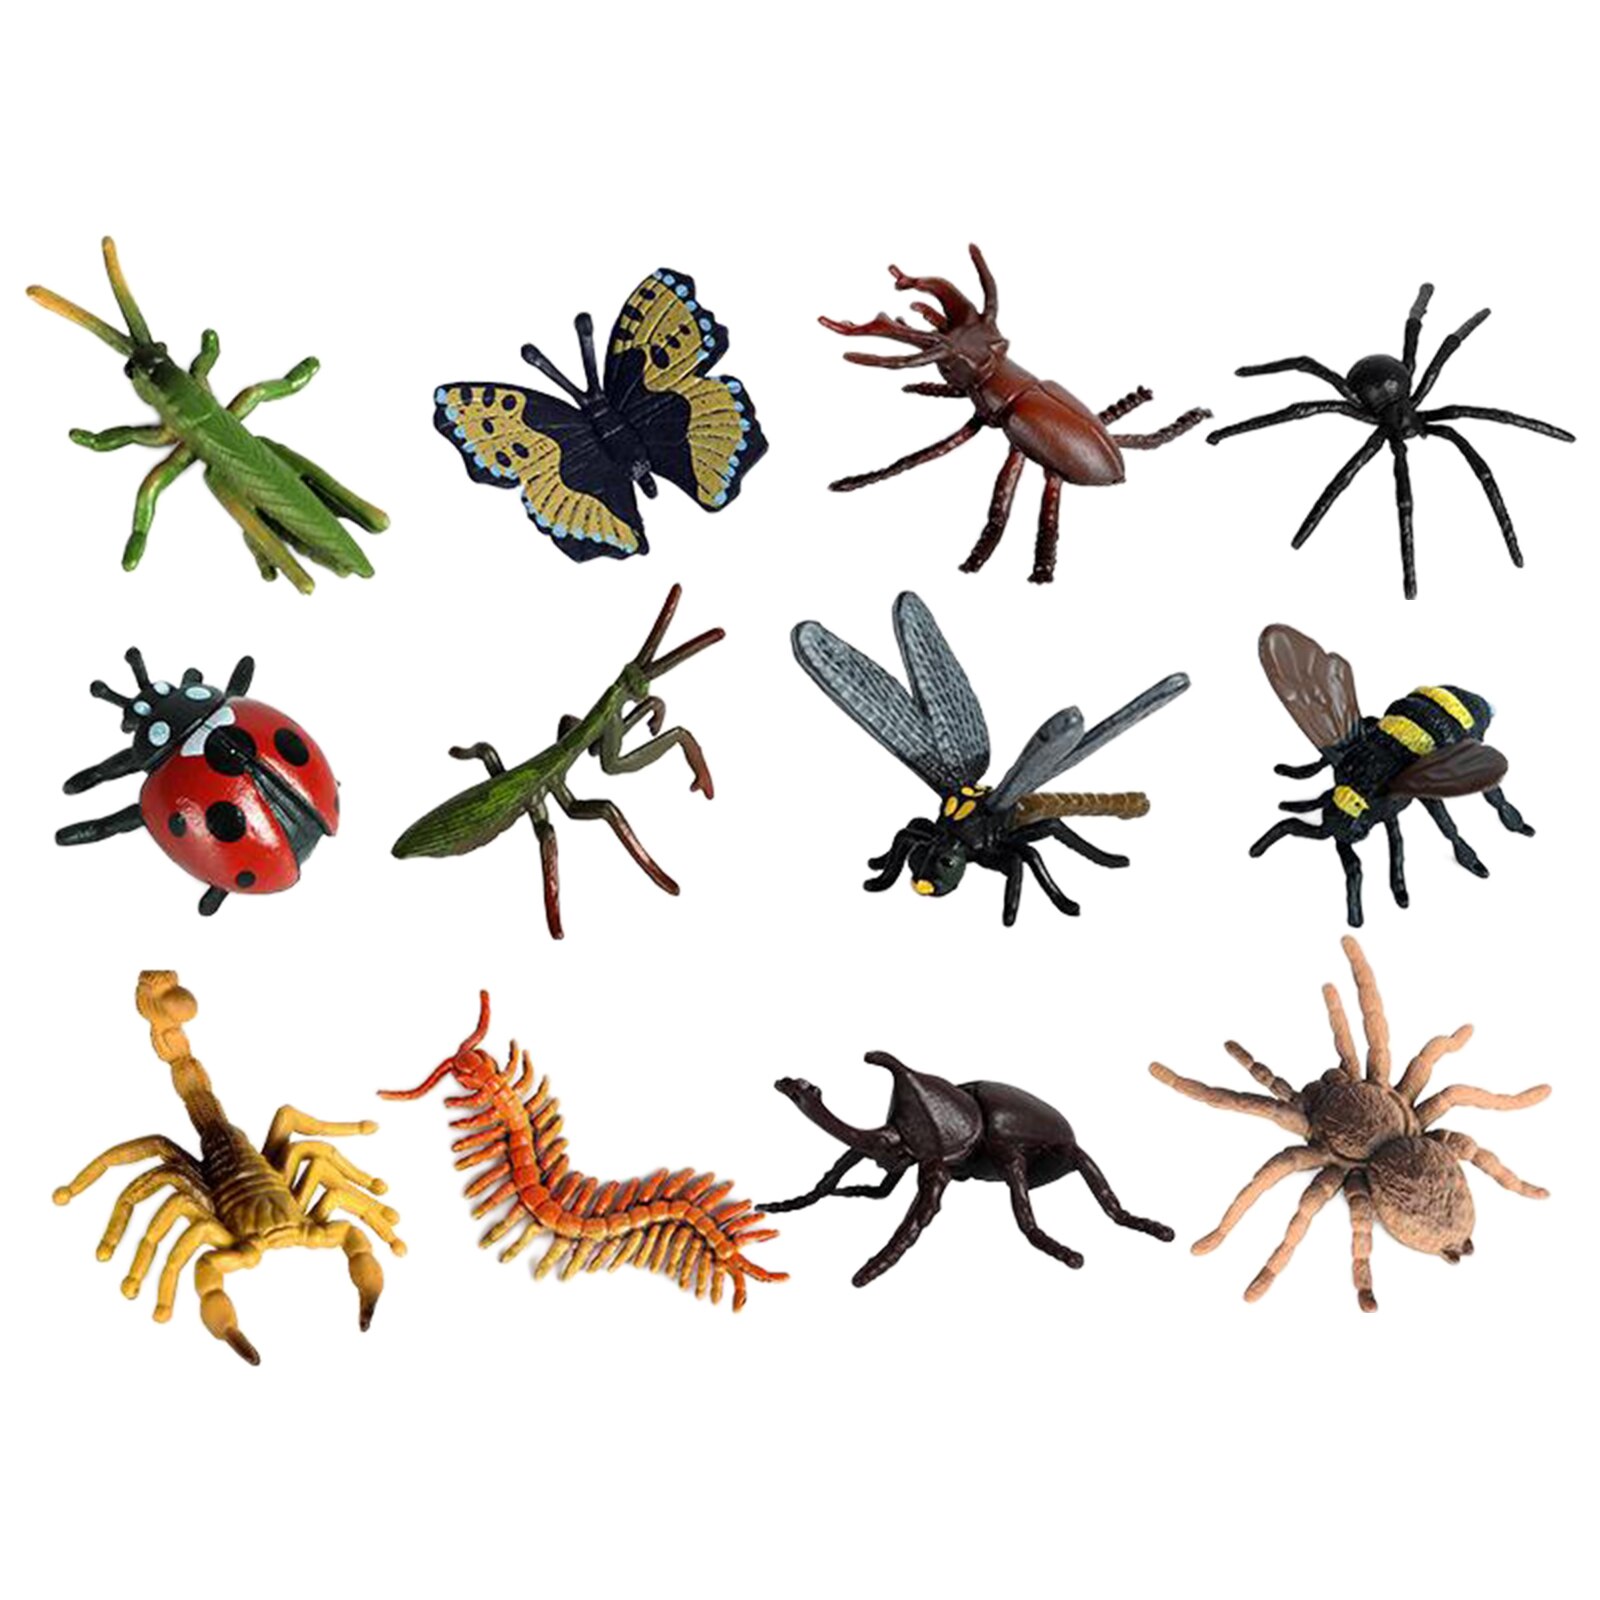 Insect Model Figures 12PCS Mini Simulation PVC Insect Bugs Animals Models Toys Set